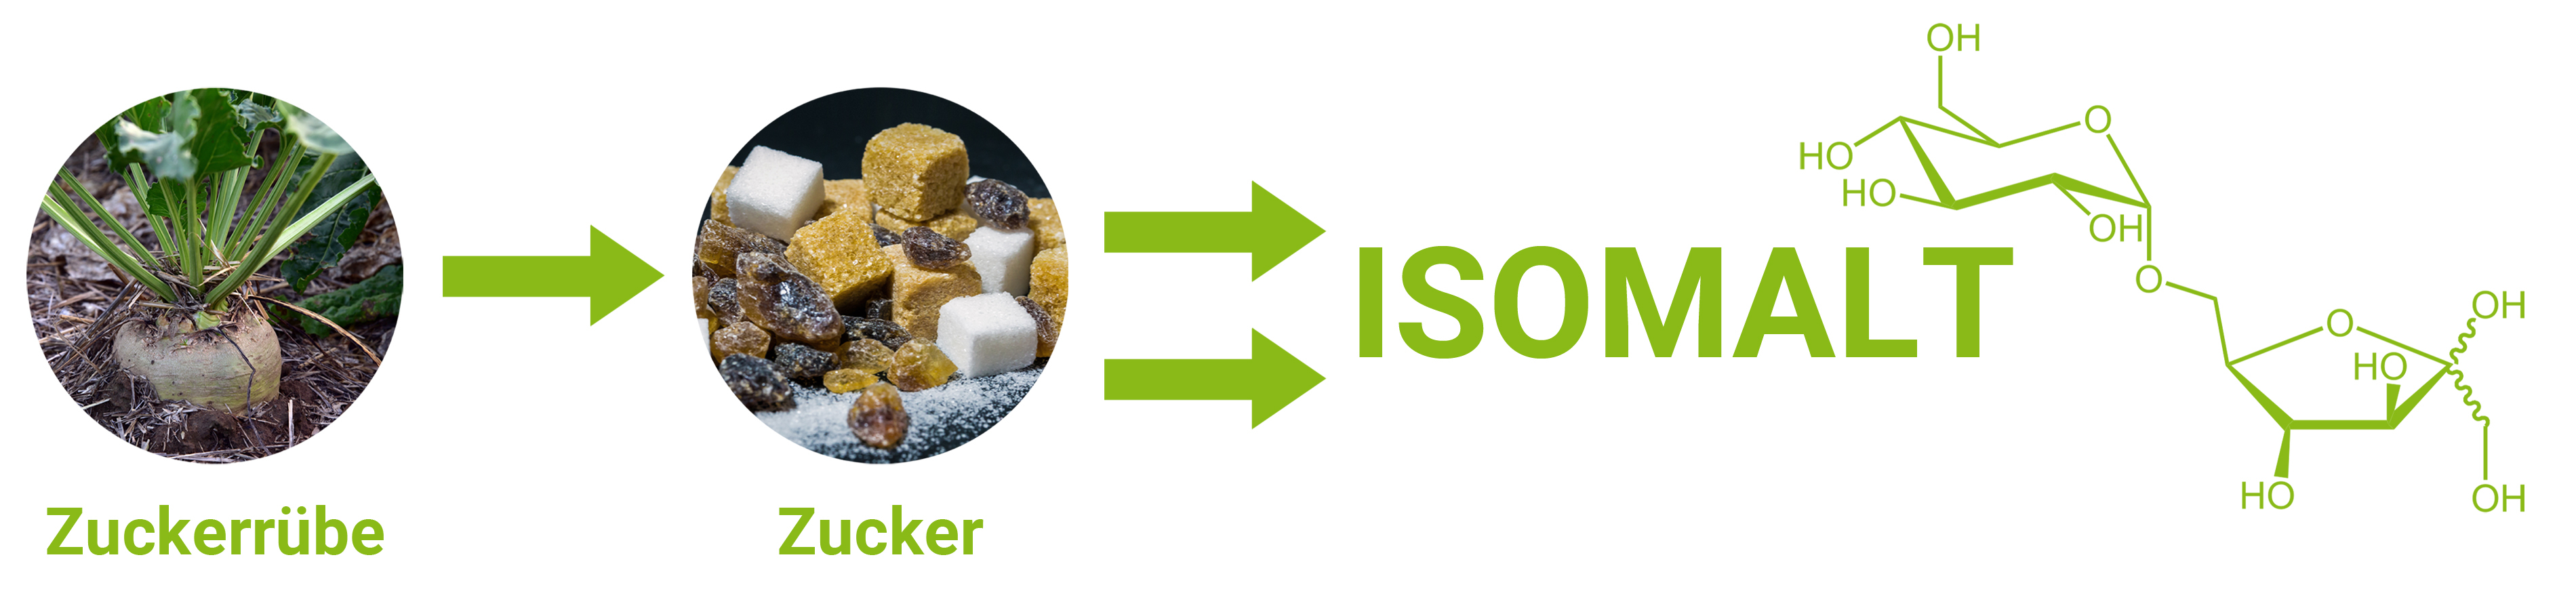 Isomalt is a sugar substitute derived from sucrose. 